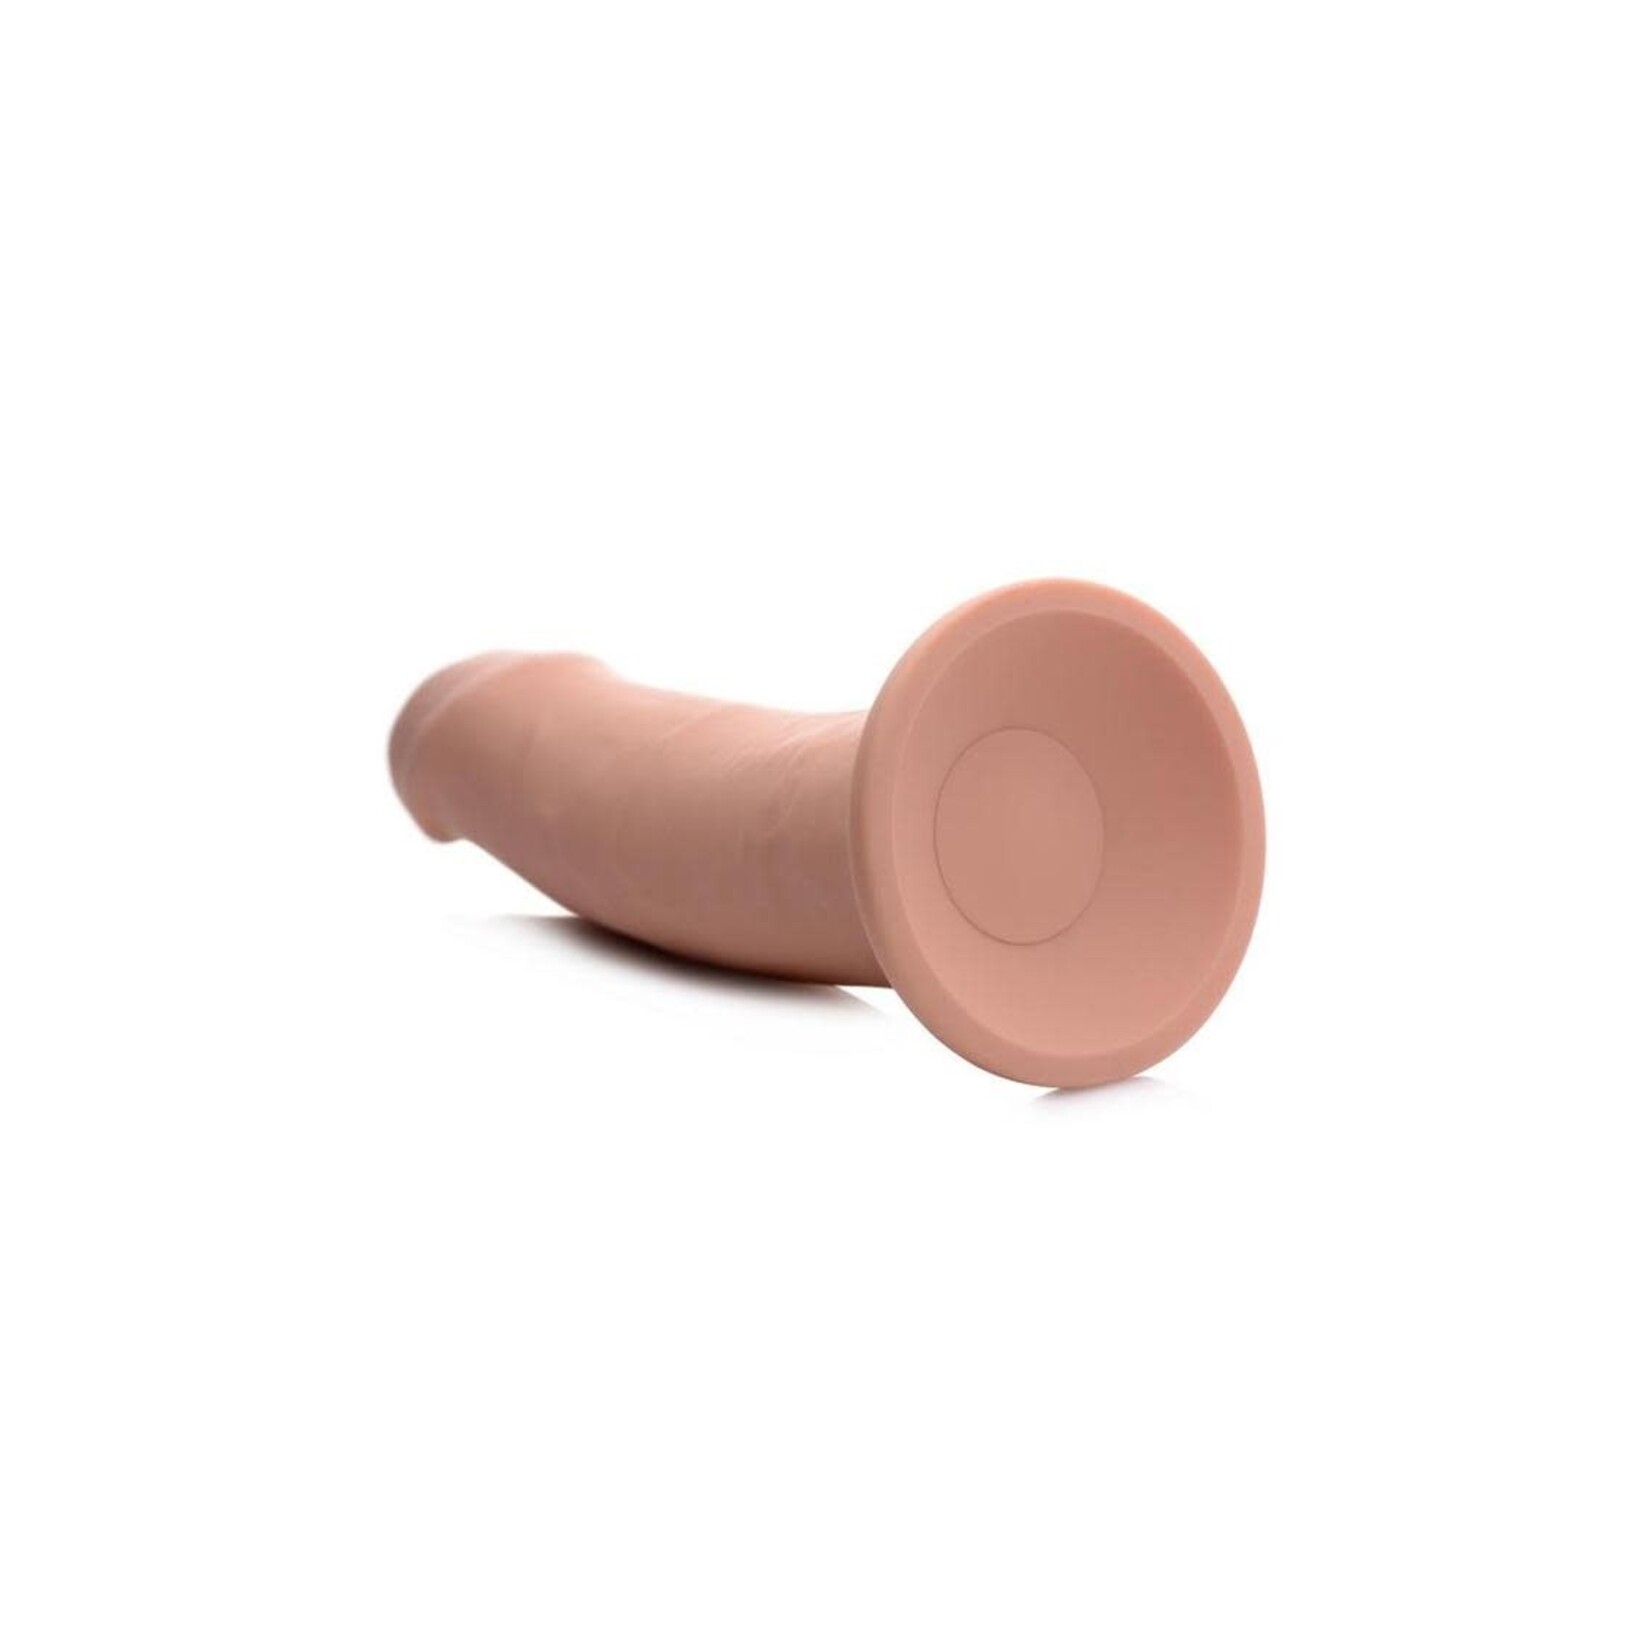 Swell 7X Inflatable & Vibrating Silicone Rechargeable Dildo With Remote Control 7in - Vanilla